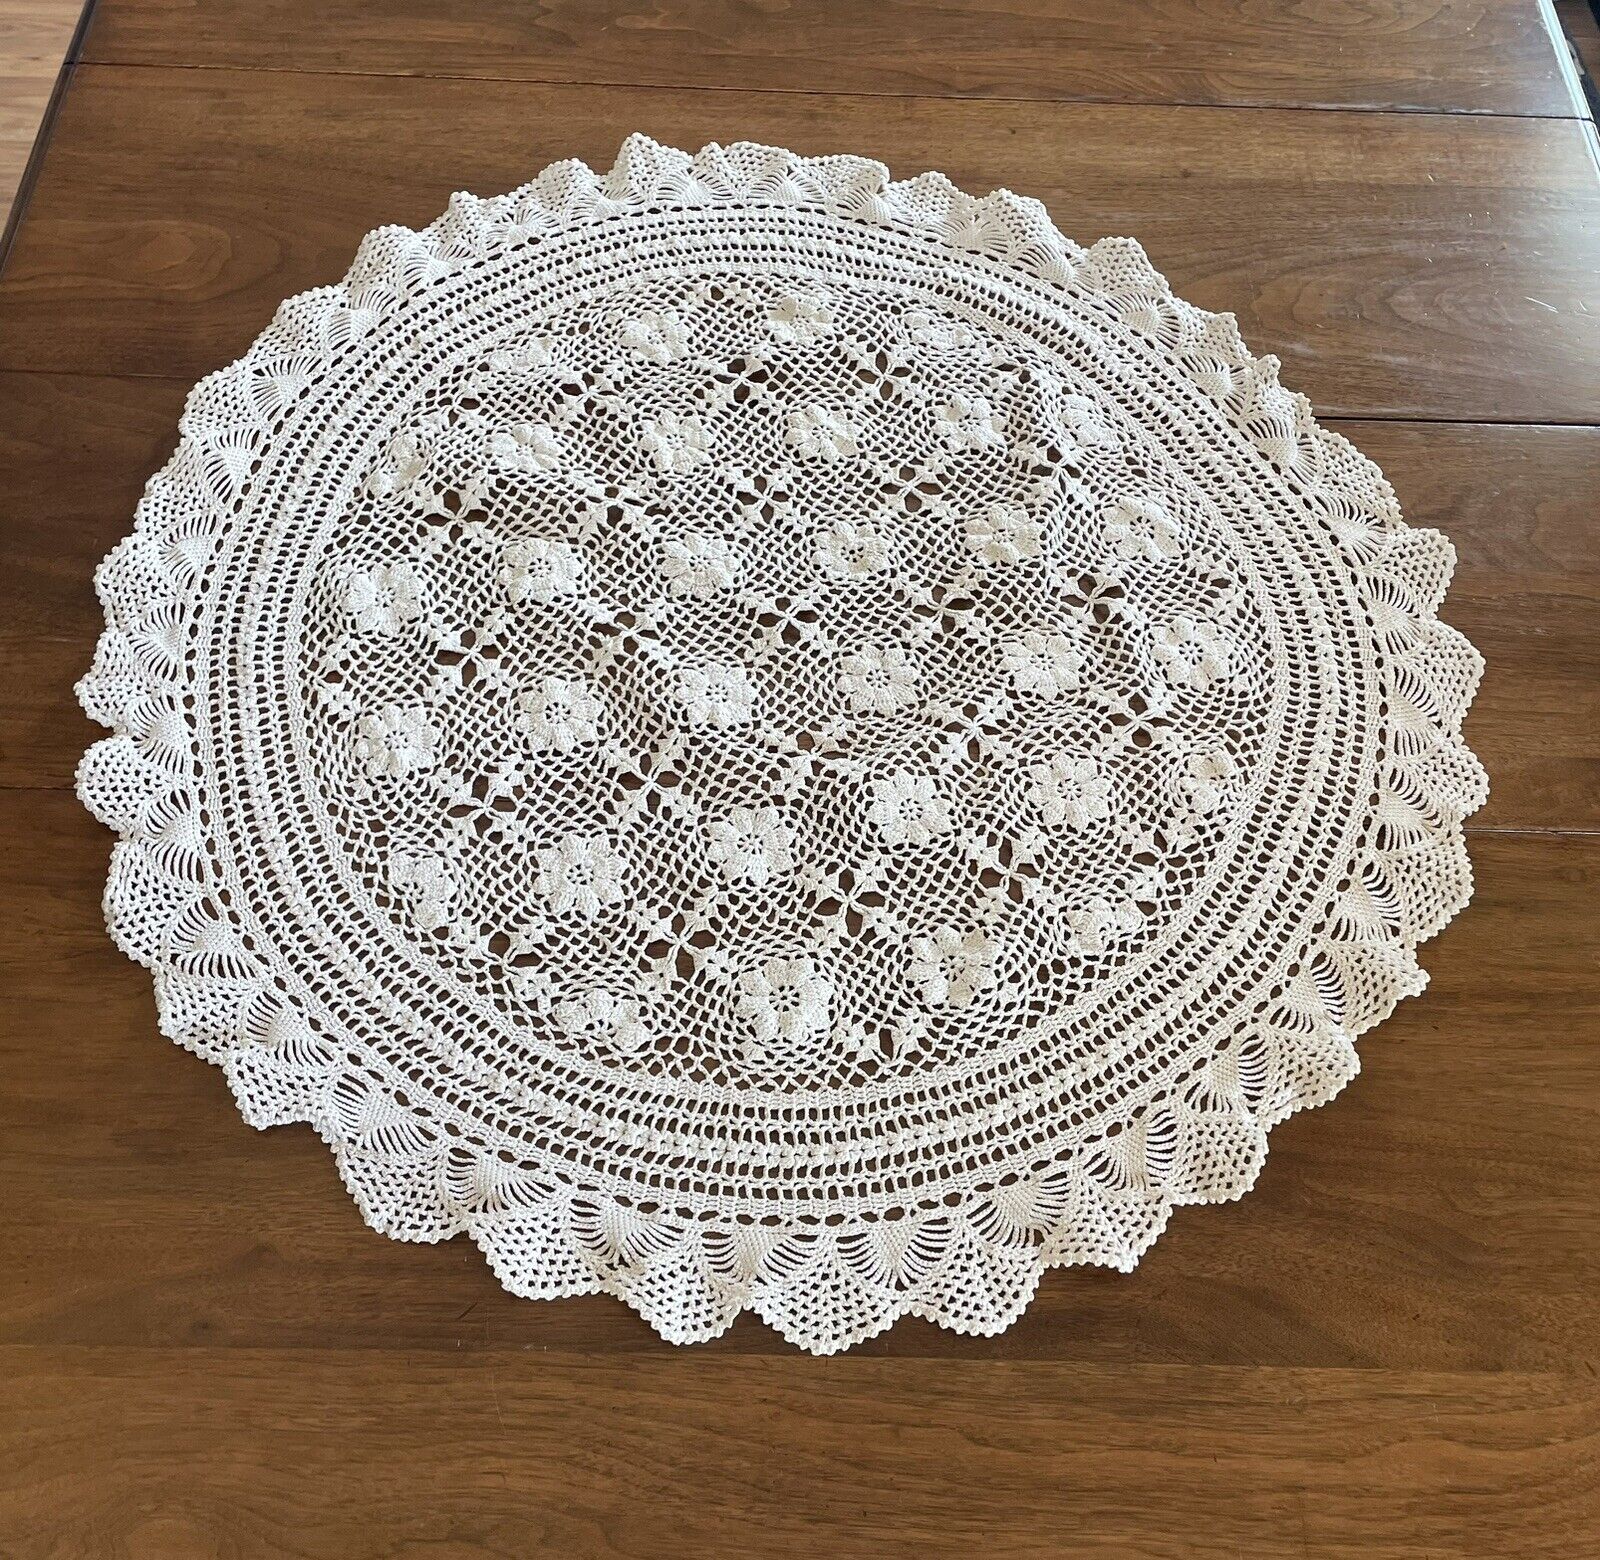 Vintage Crocheted By Hand Cotton Tablecloth Round 30”x30” Beautiful Flowers VGC